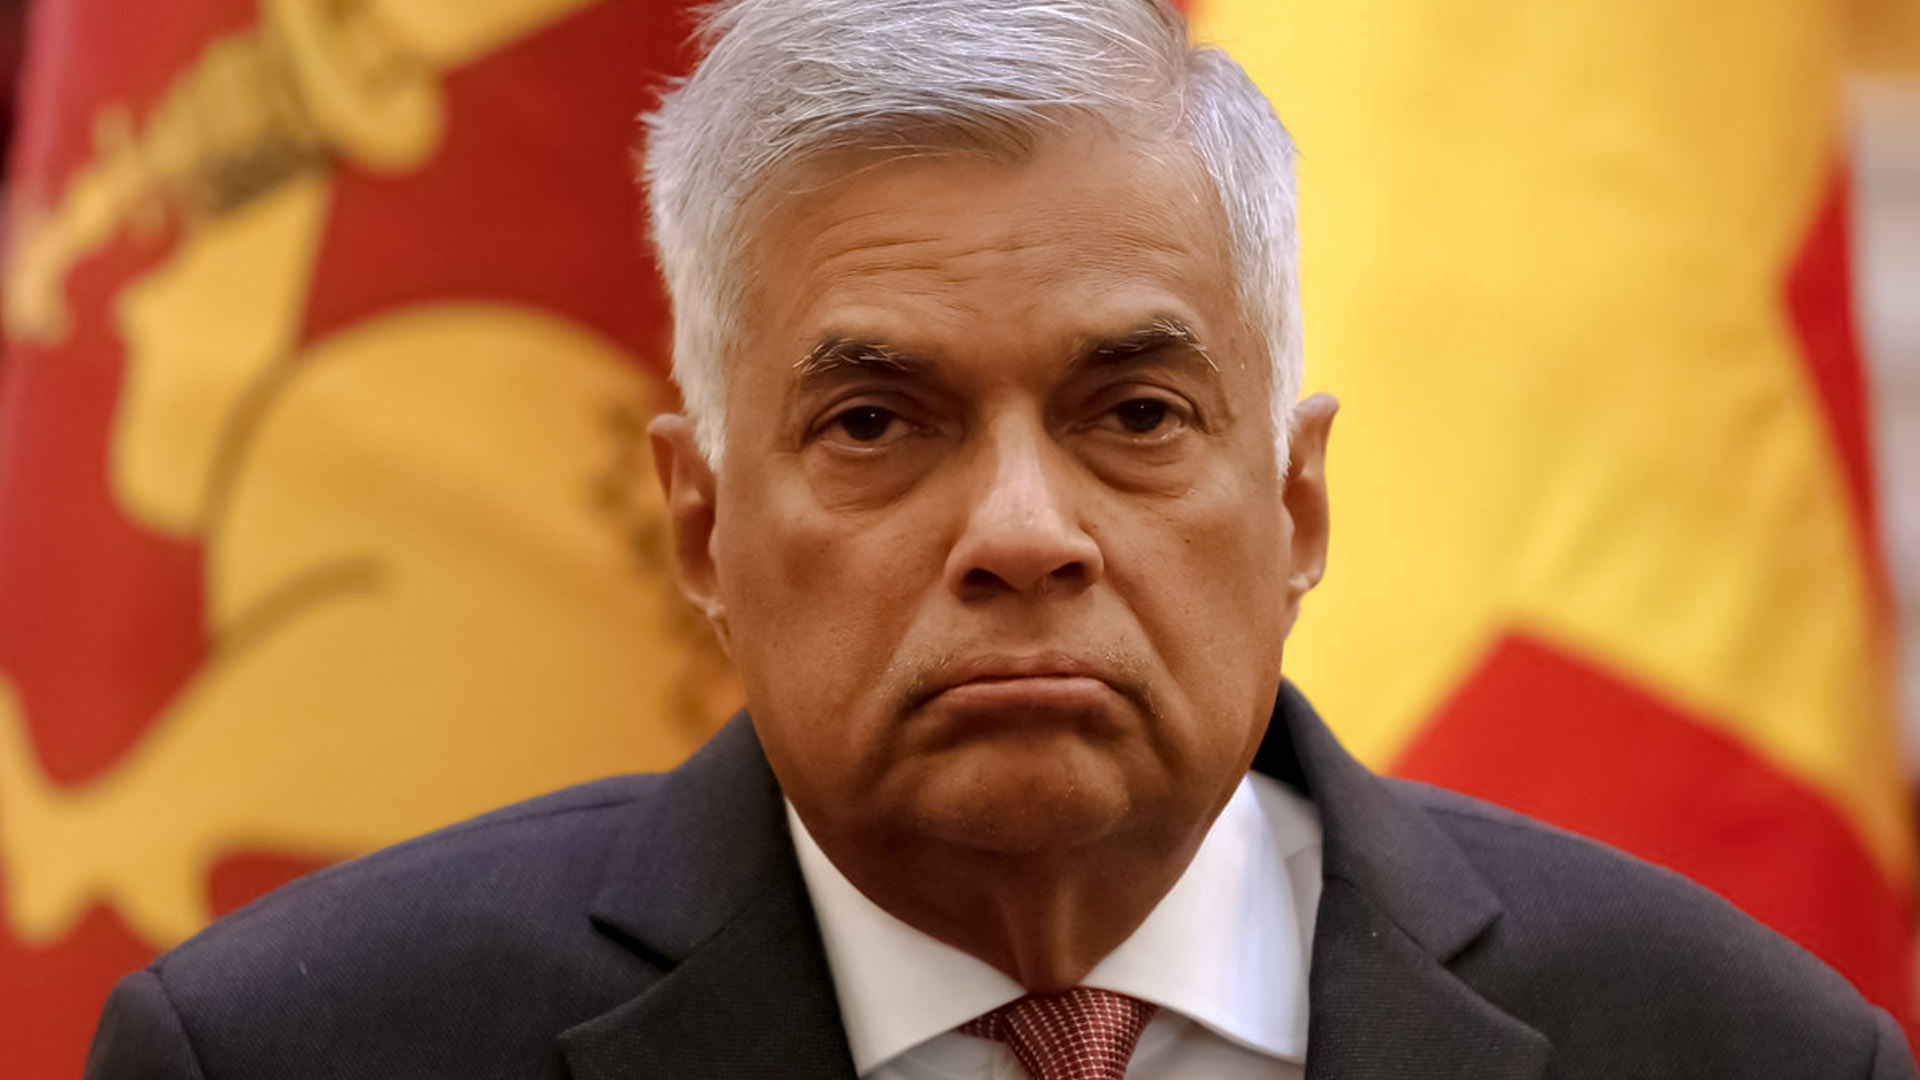 Sri Lankan PM Ranil Wickremesinghe appointed to defuse protests